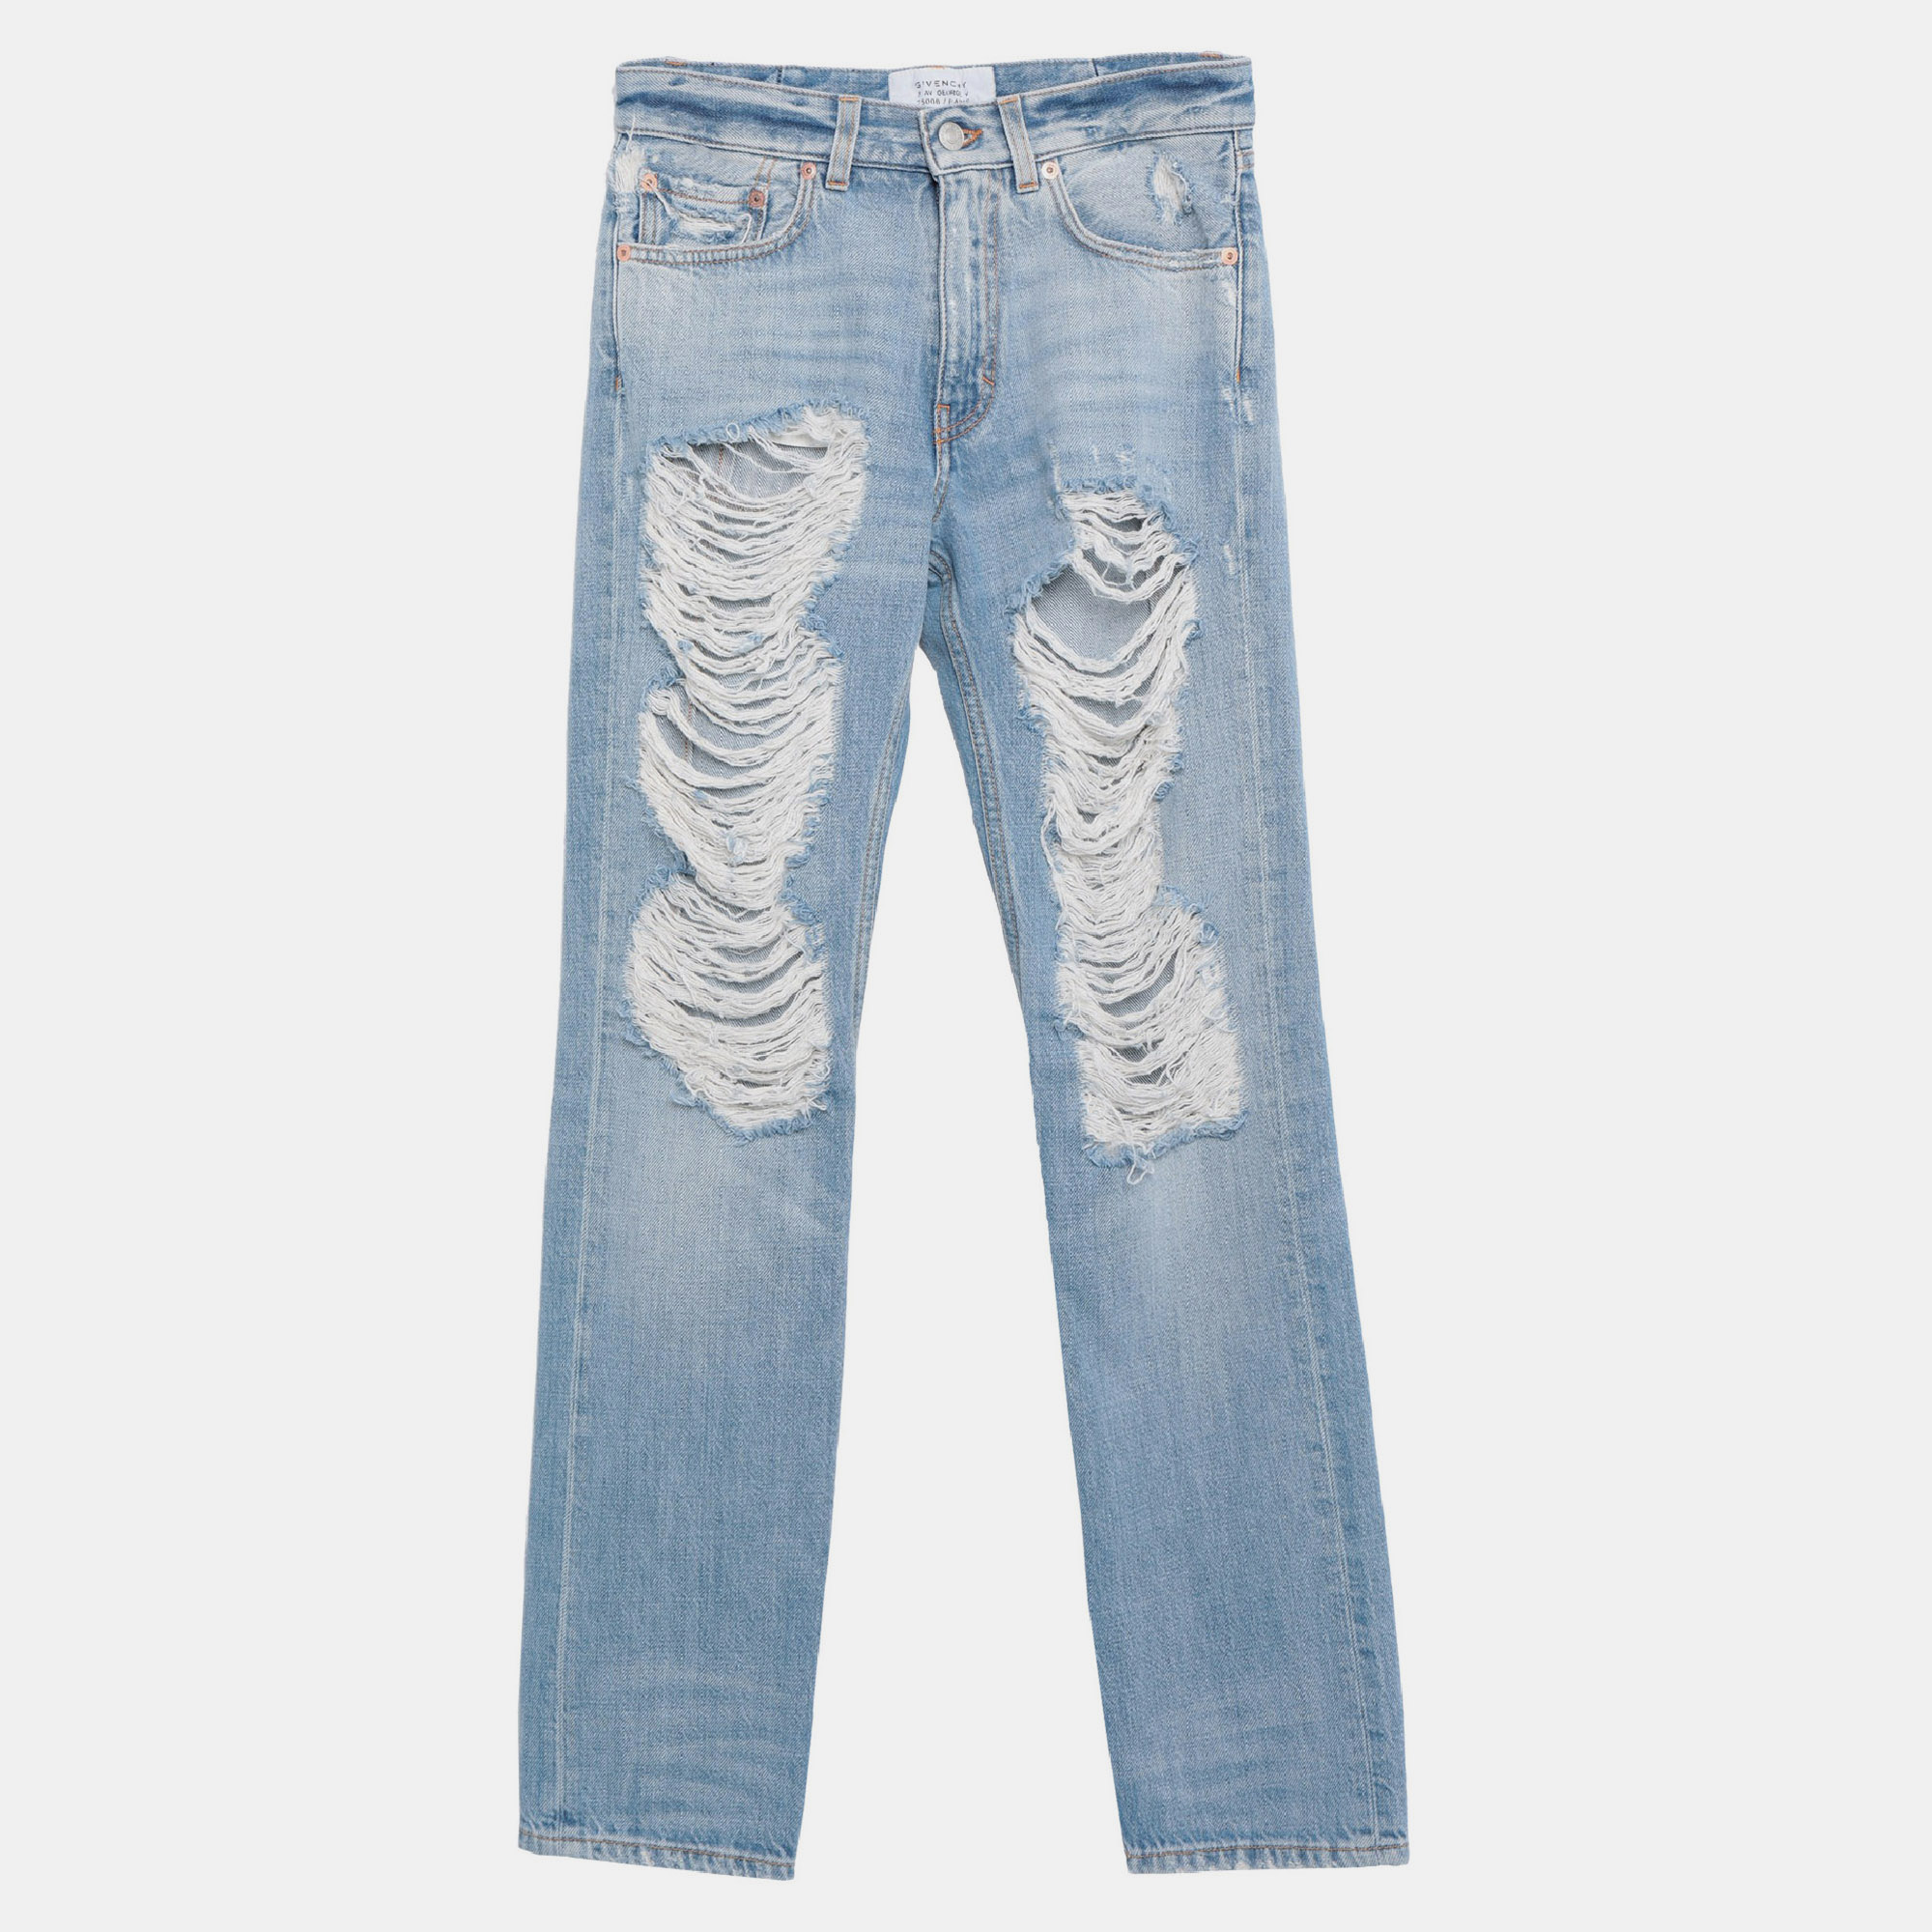 Givenchy cotton jeans 27